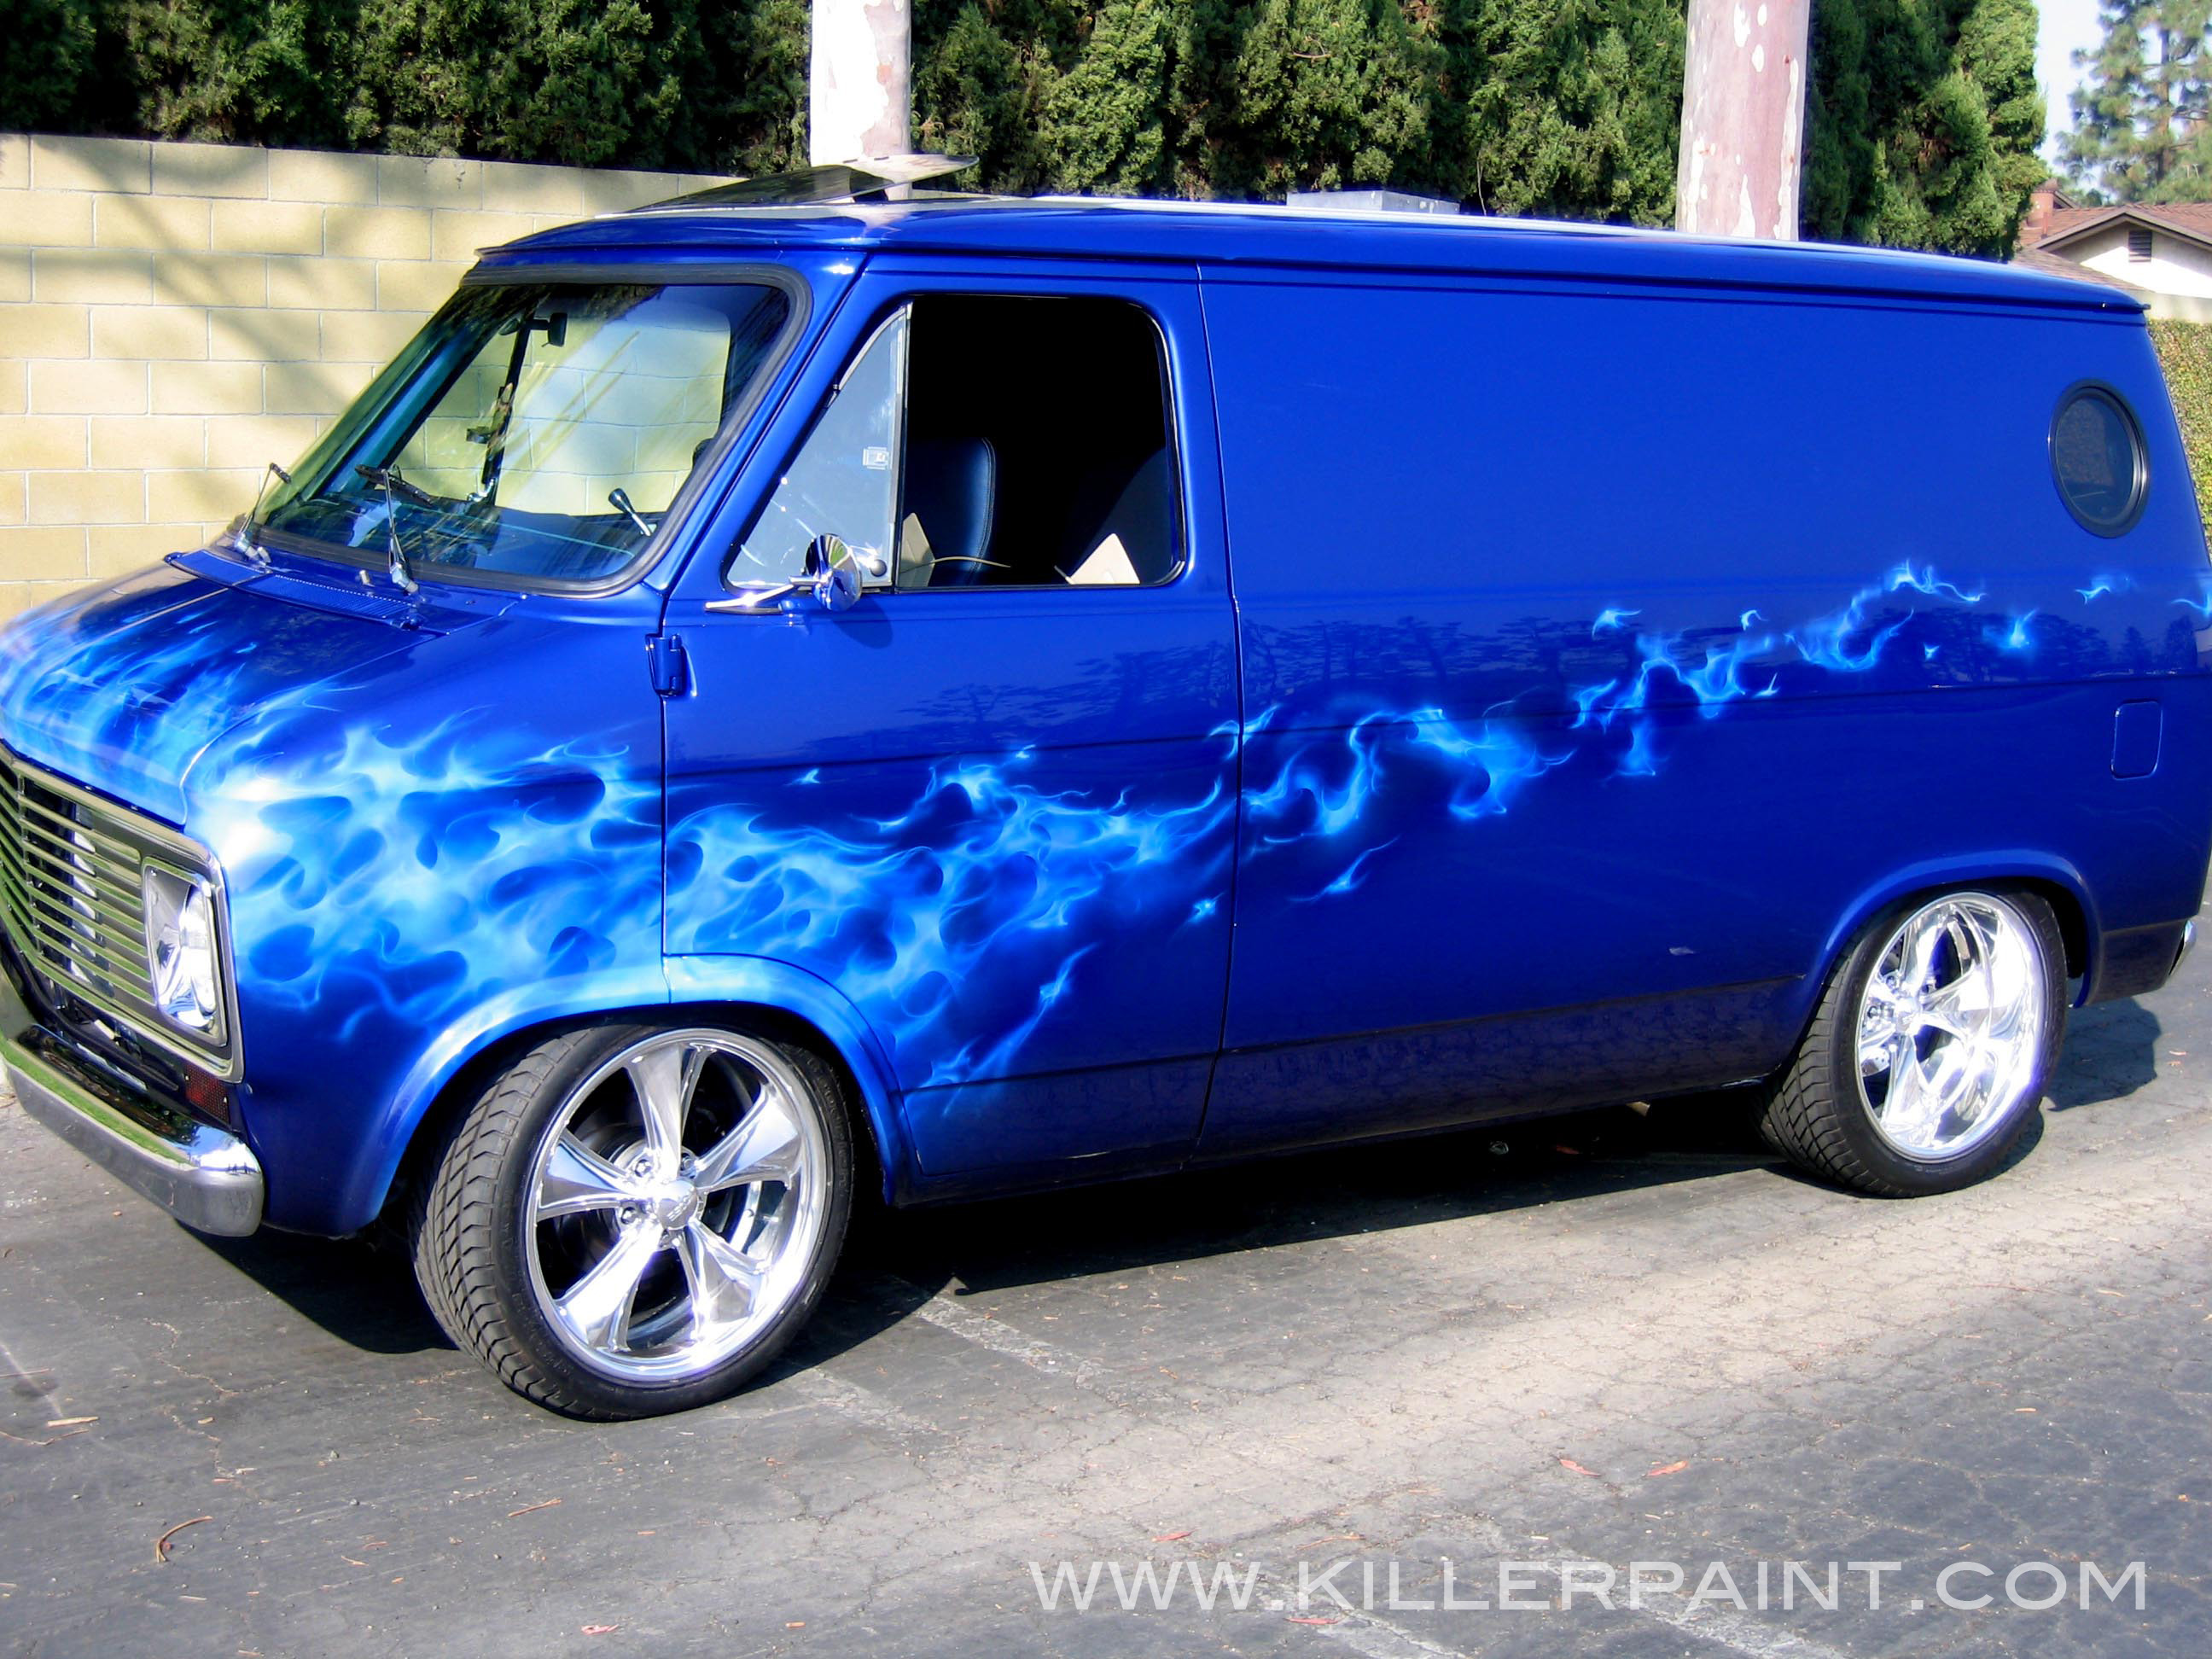 Image result for blue flames custom paint